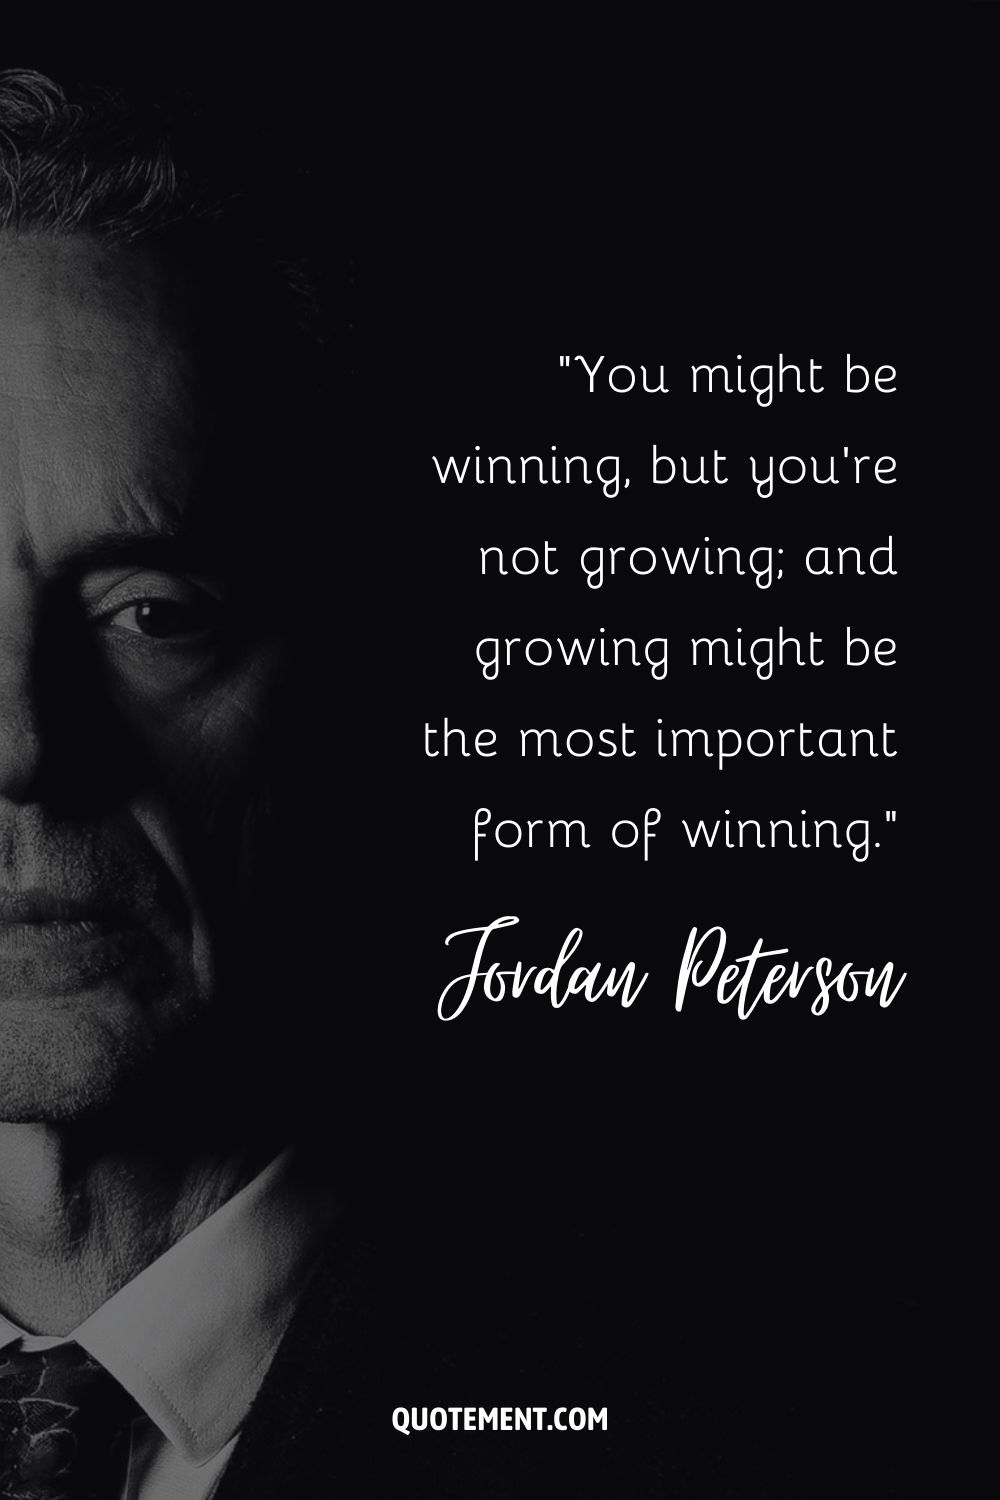 You might be winning, but you’re not growing; and growing might be the most important form of winning